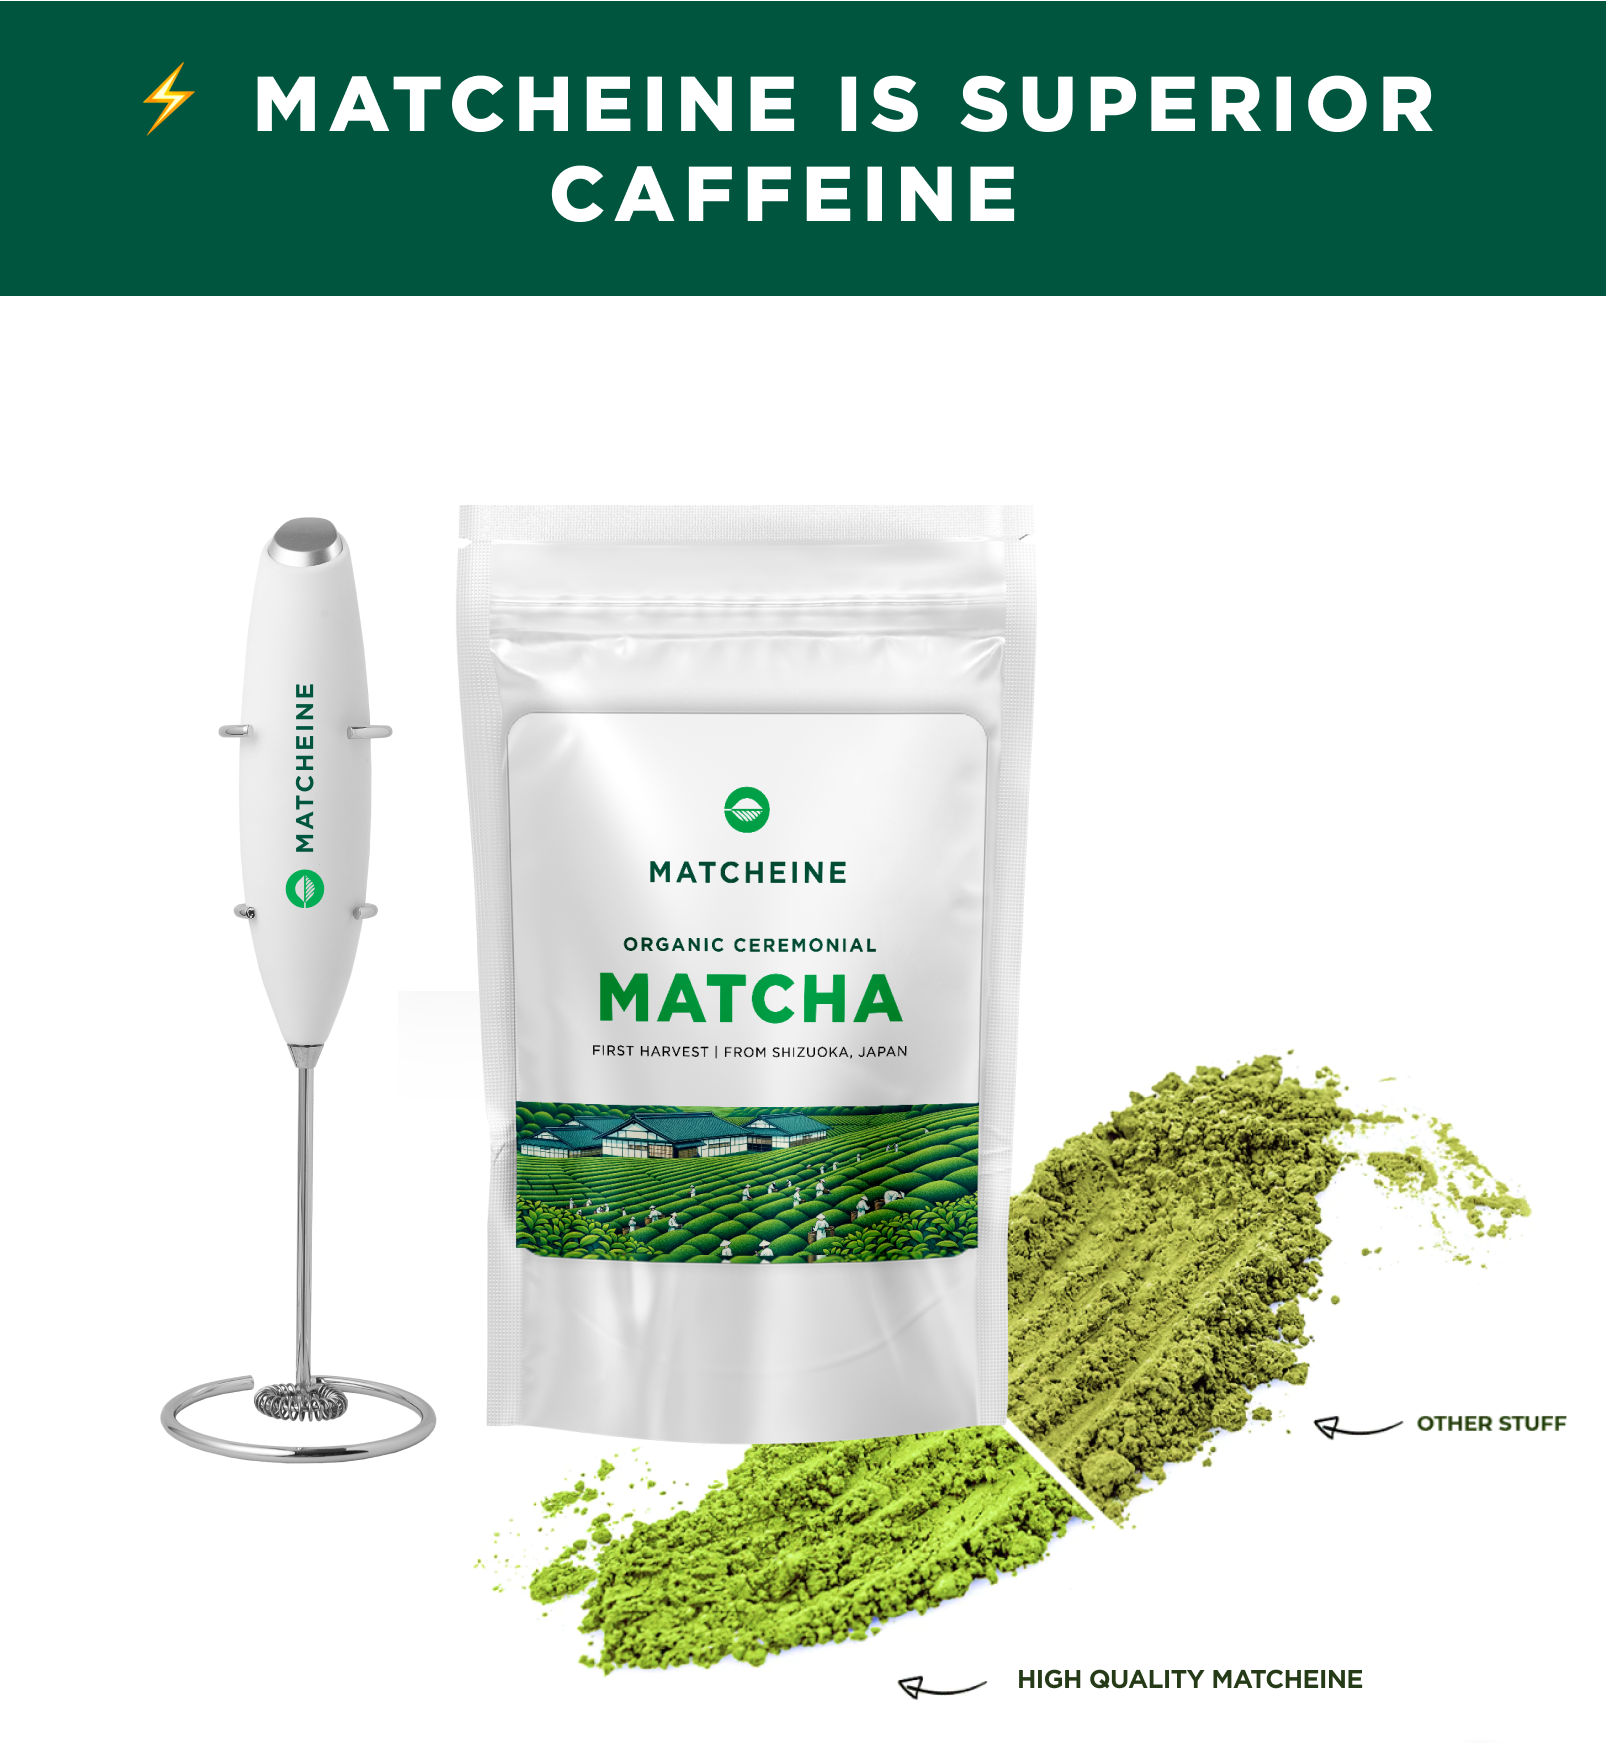 Starter Kit - Ceremonial Matcha & FREE Frother